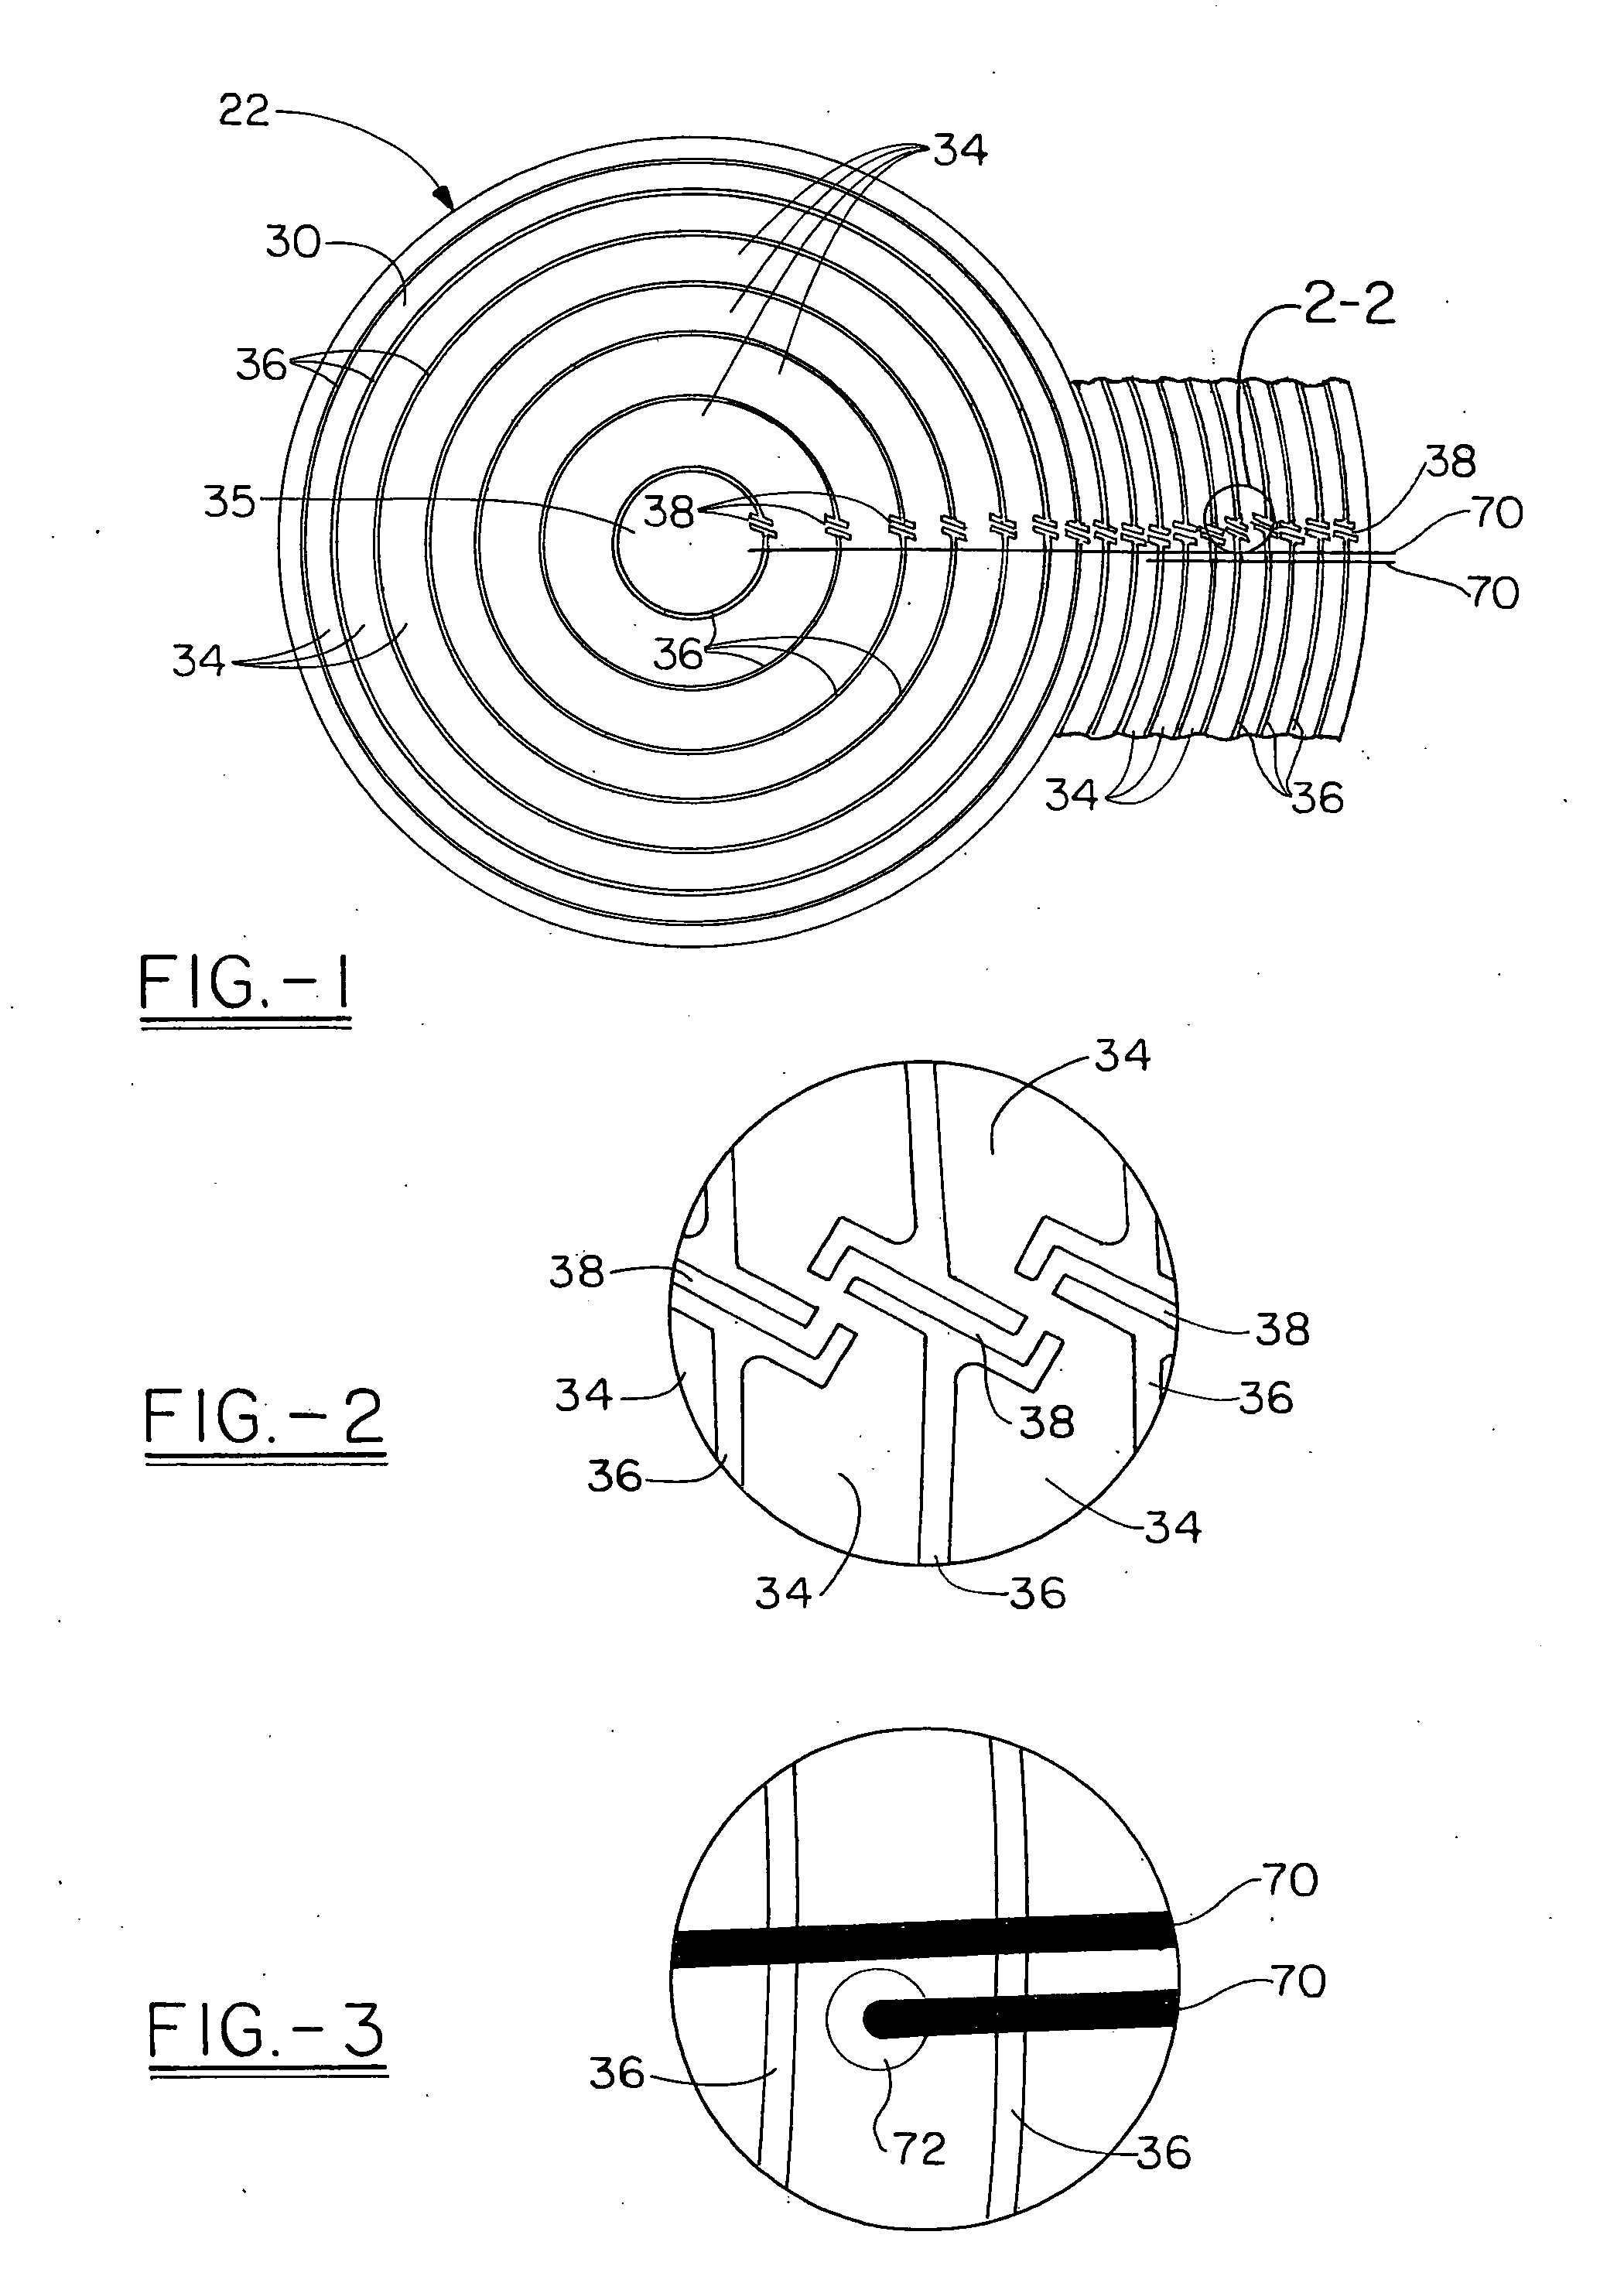 Tunable electro-optic liquid crystal lenses and methods for forming the lenses